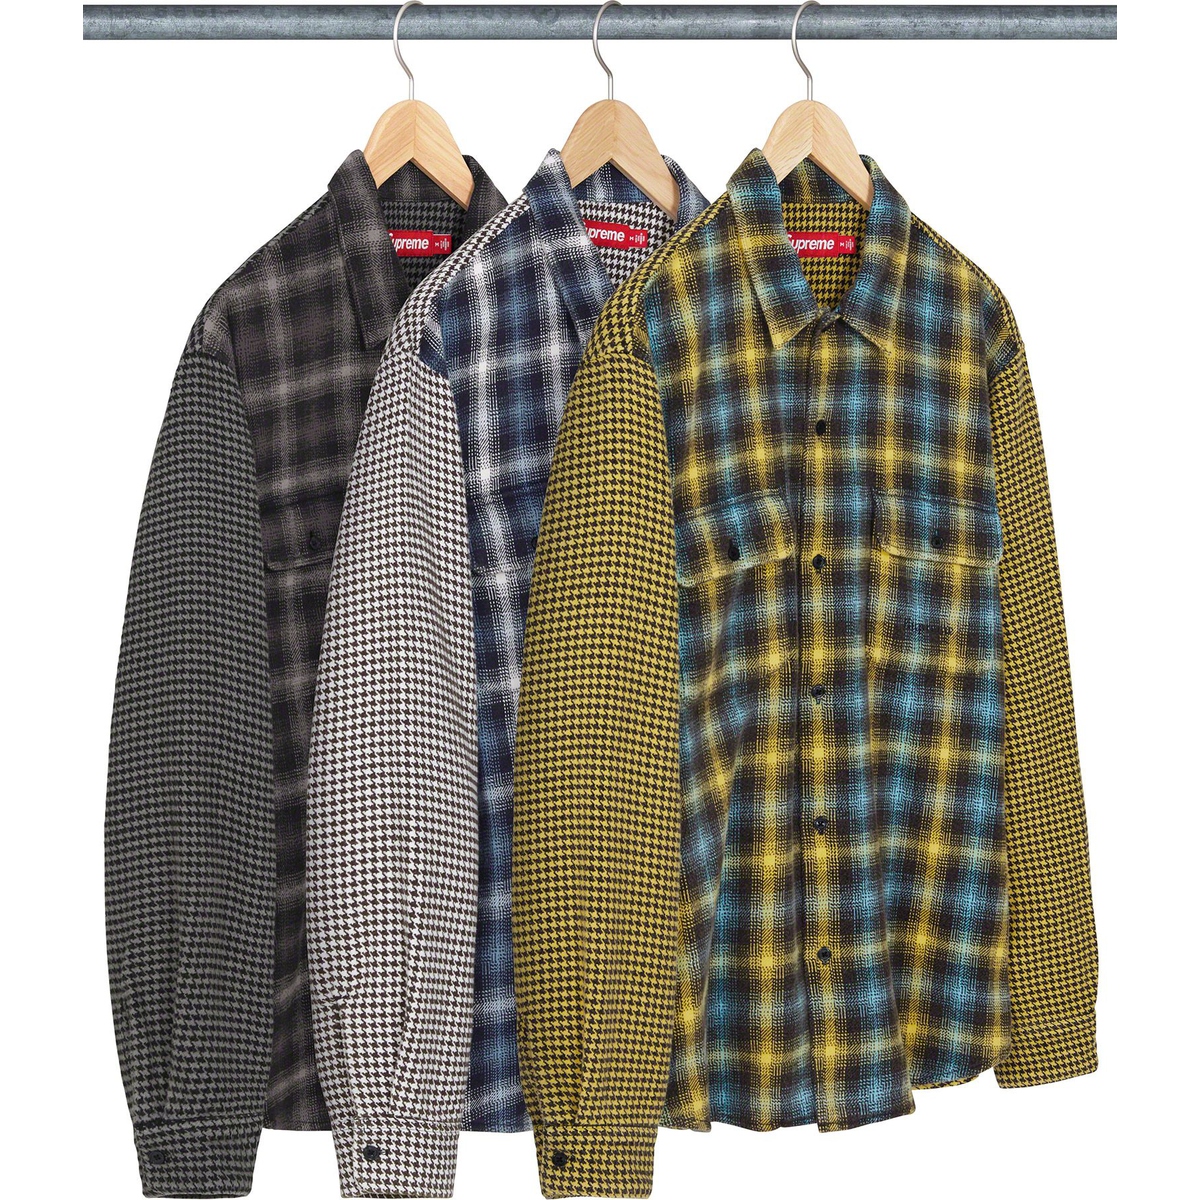 Supreme Houndstooth Plaid Flannel Shirt released during fall winter 23 season